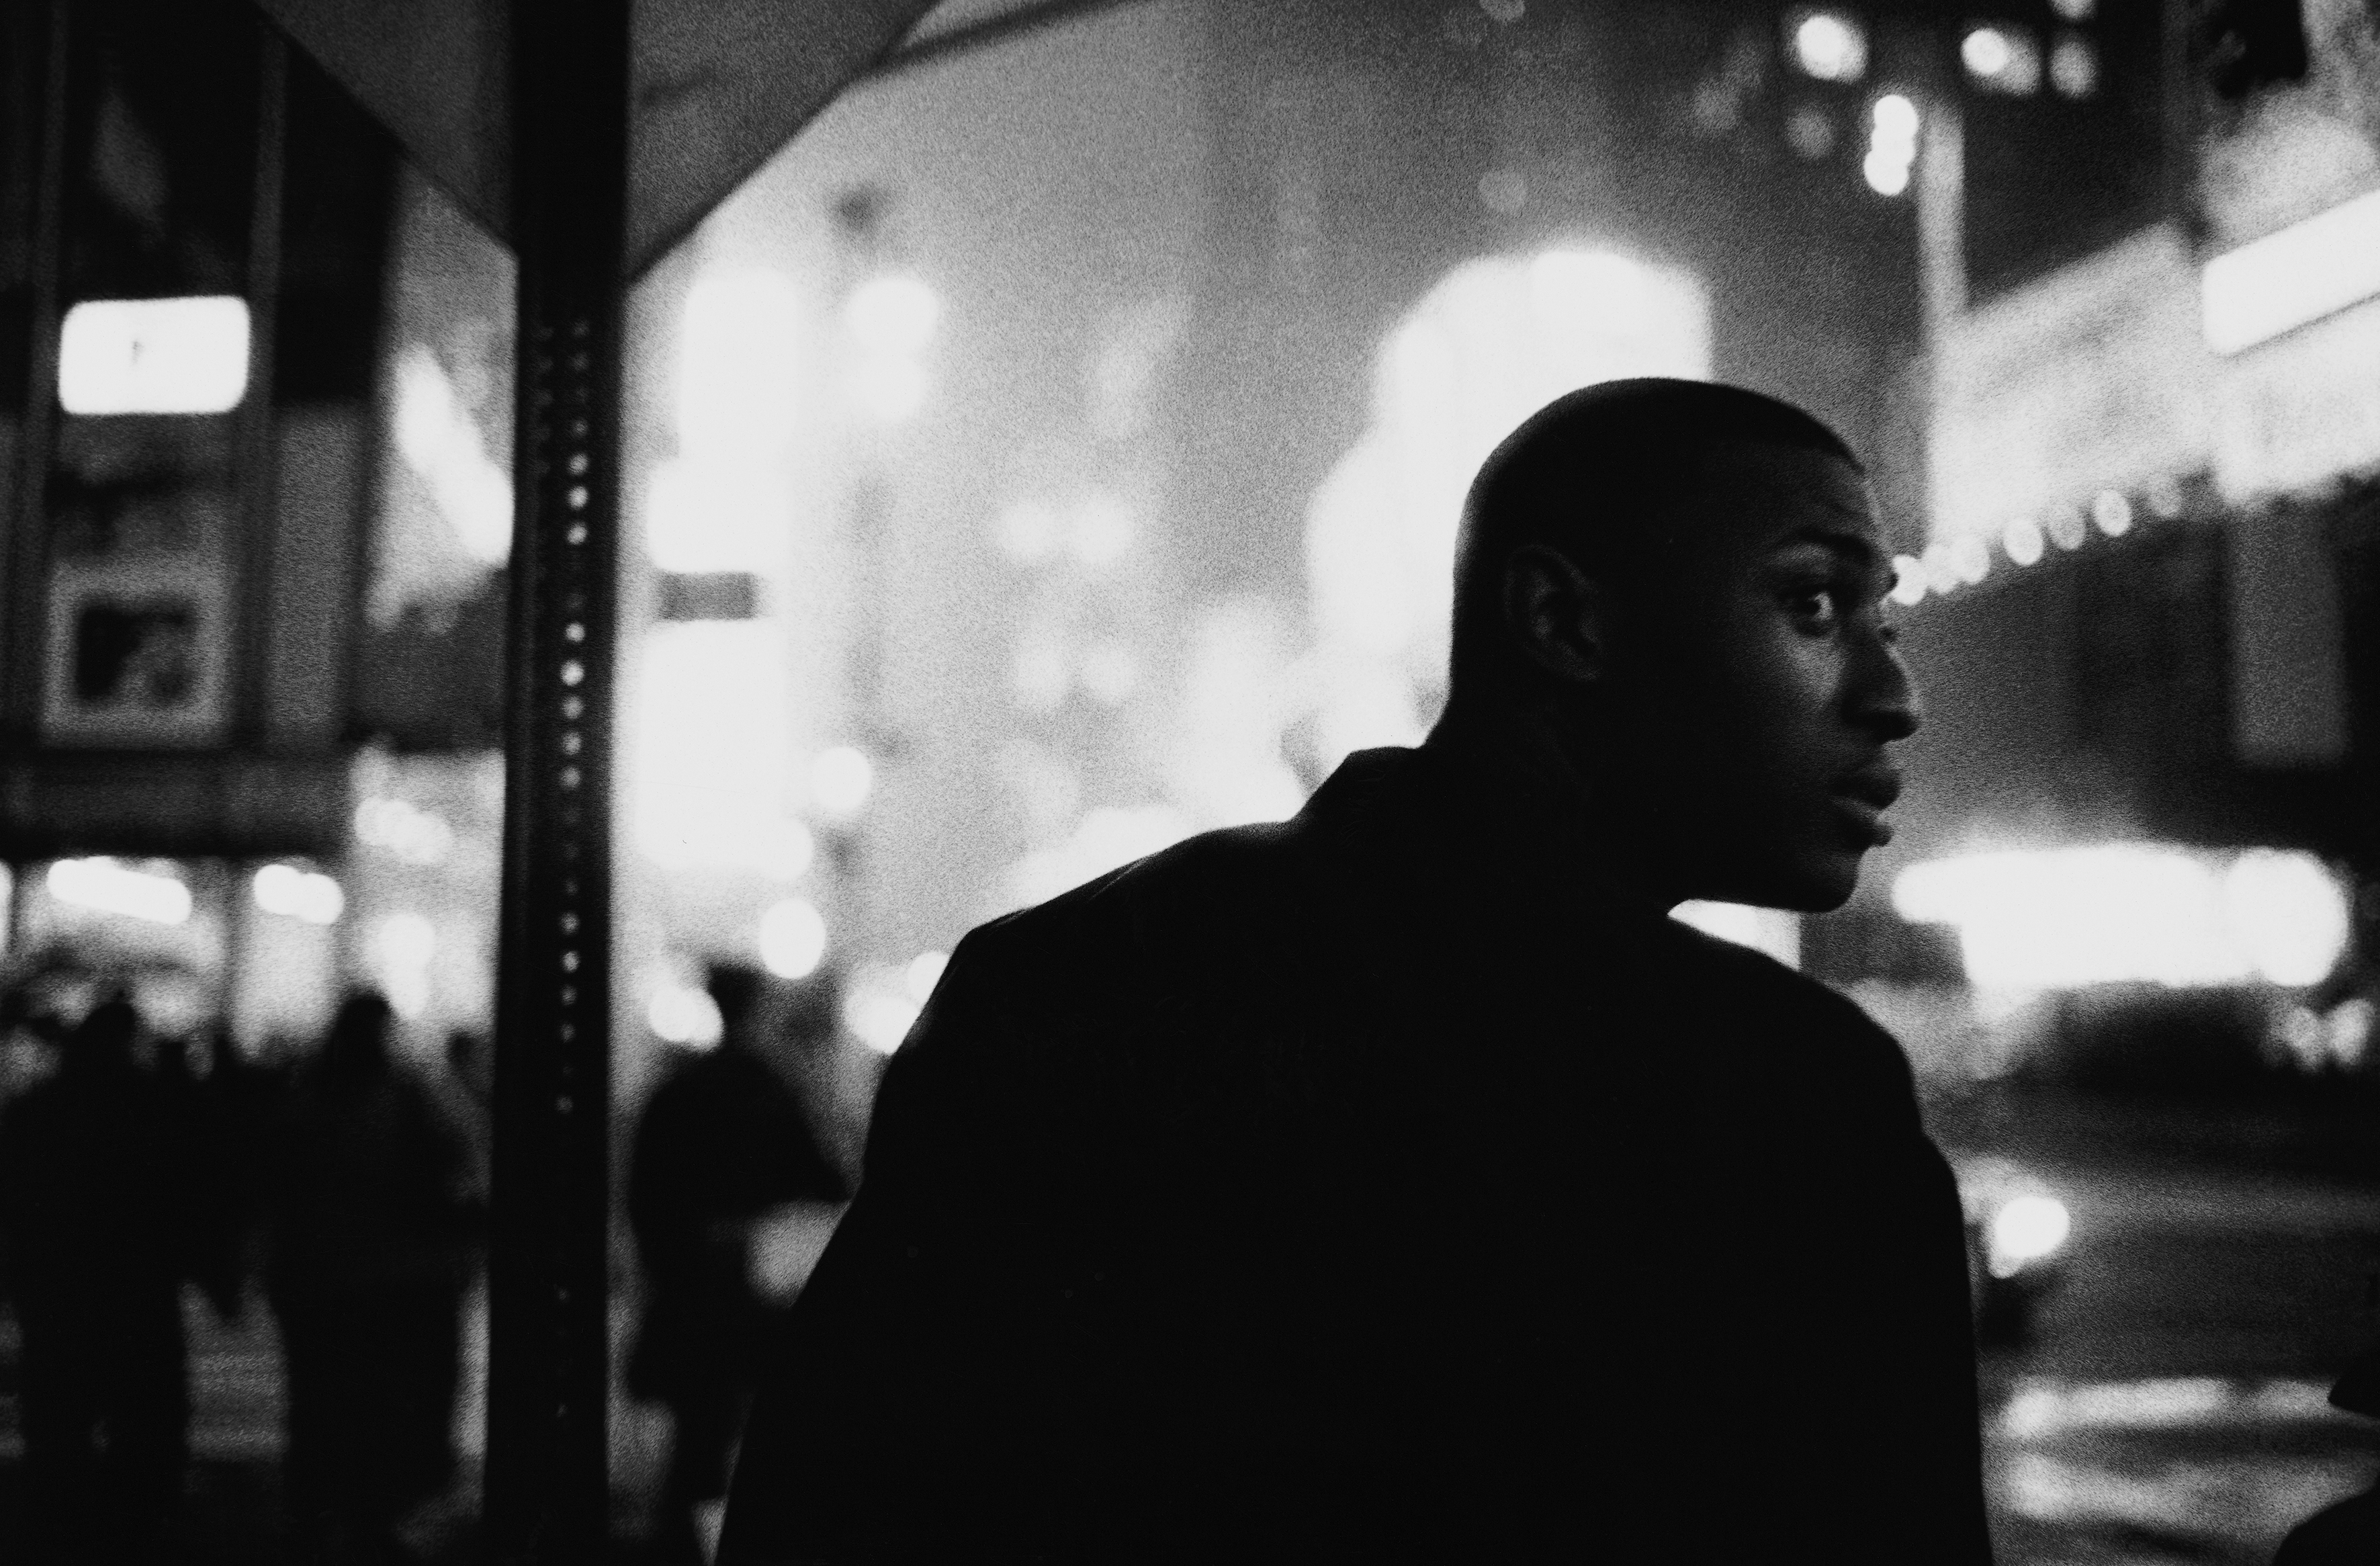 a man peers over his shoulder in a busy nighttime street scene